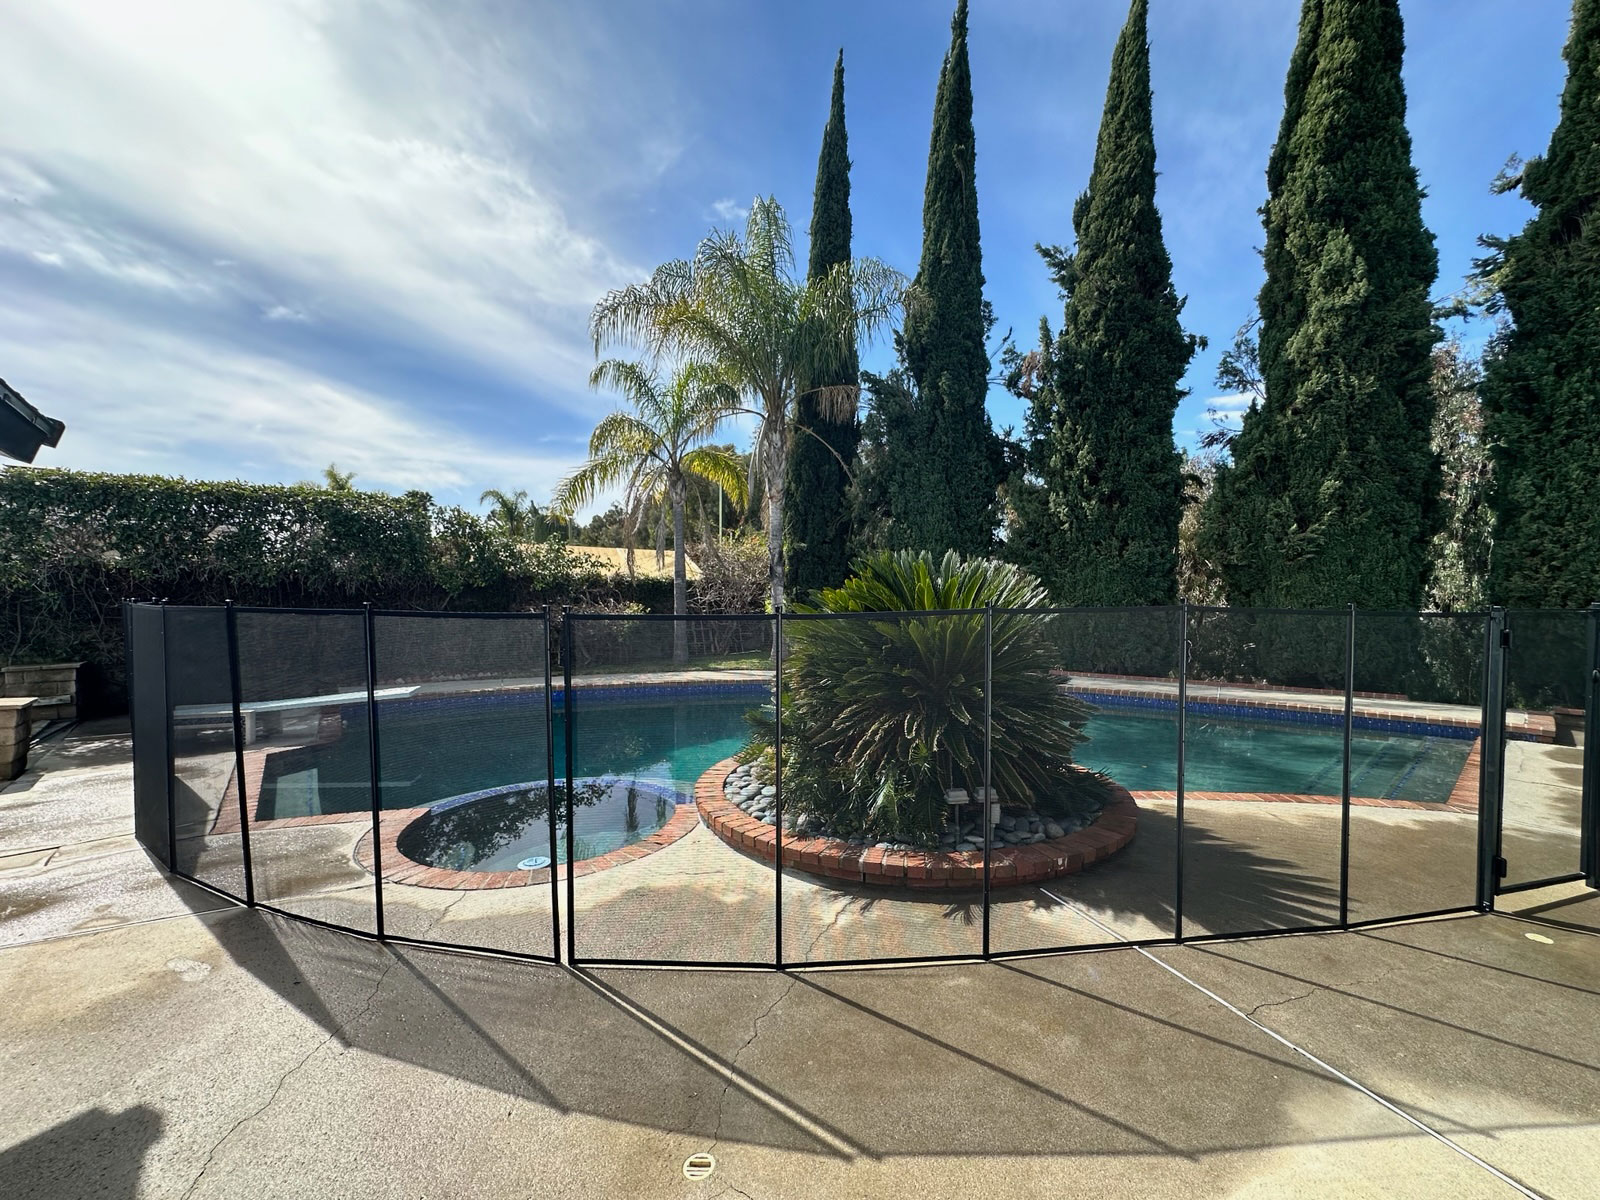 Summerfield Pool Safety - LARR Fence